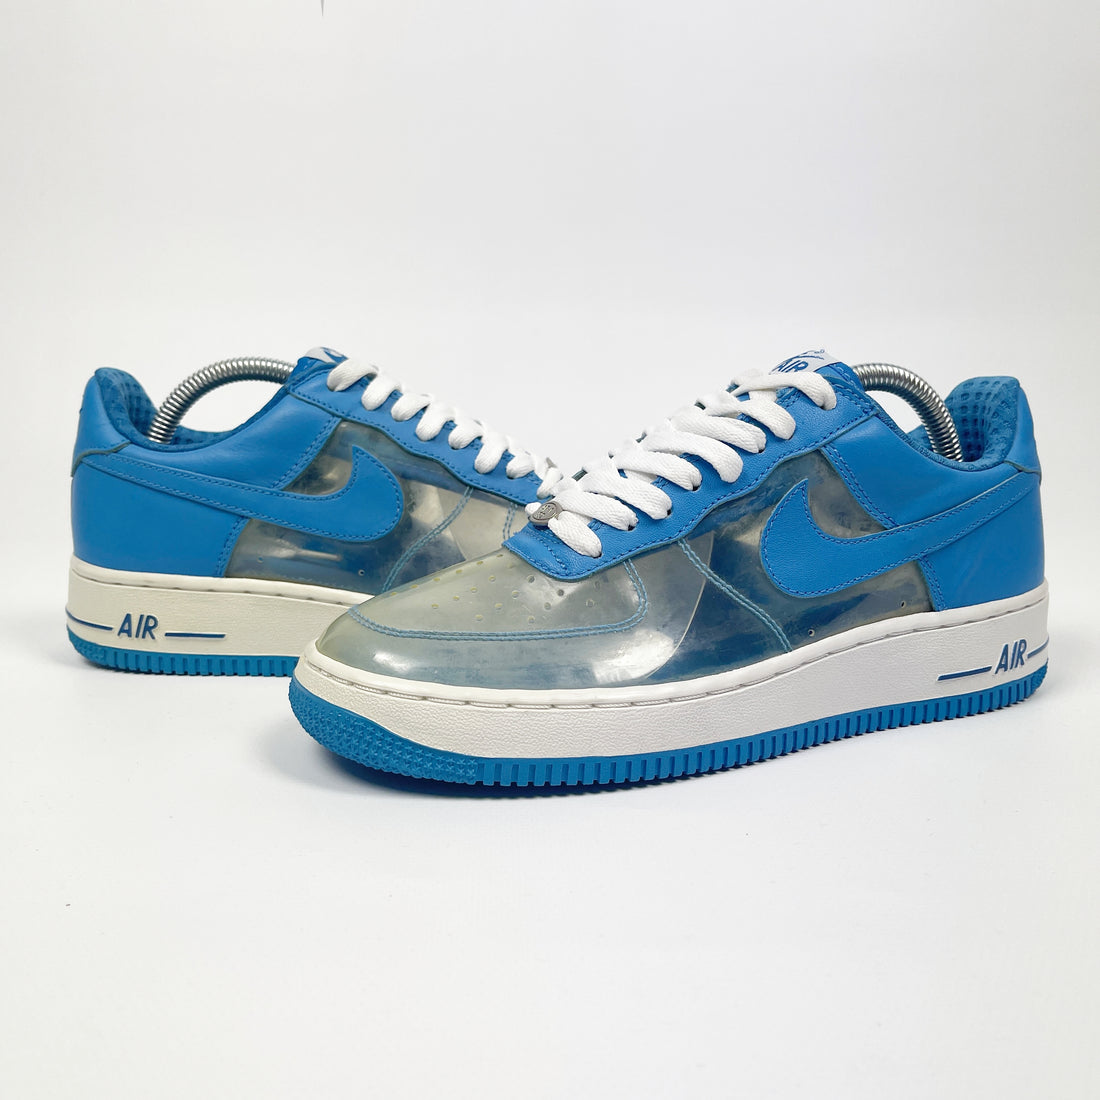 Nike Air force 1 'Fantastic 4' Invisible Woman 2006 - Vintagetts